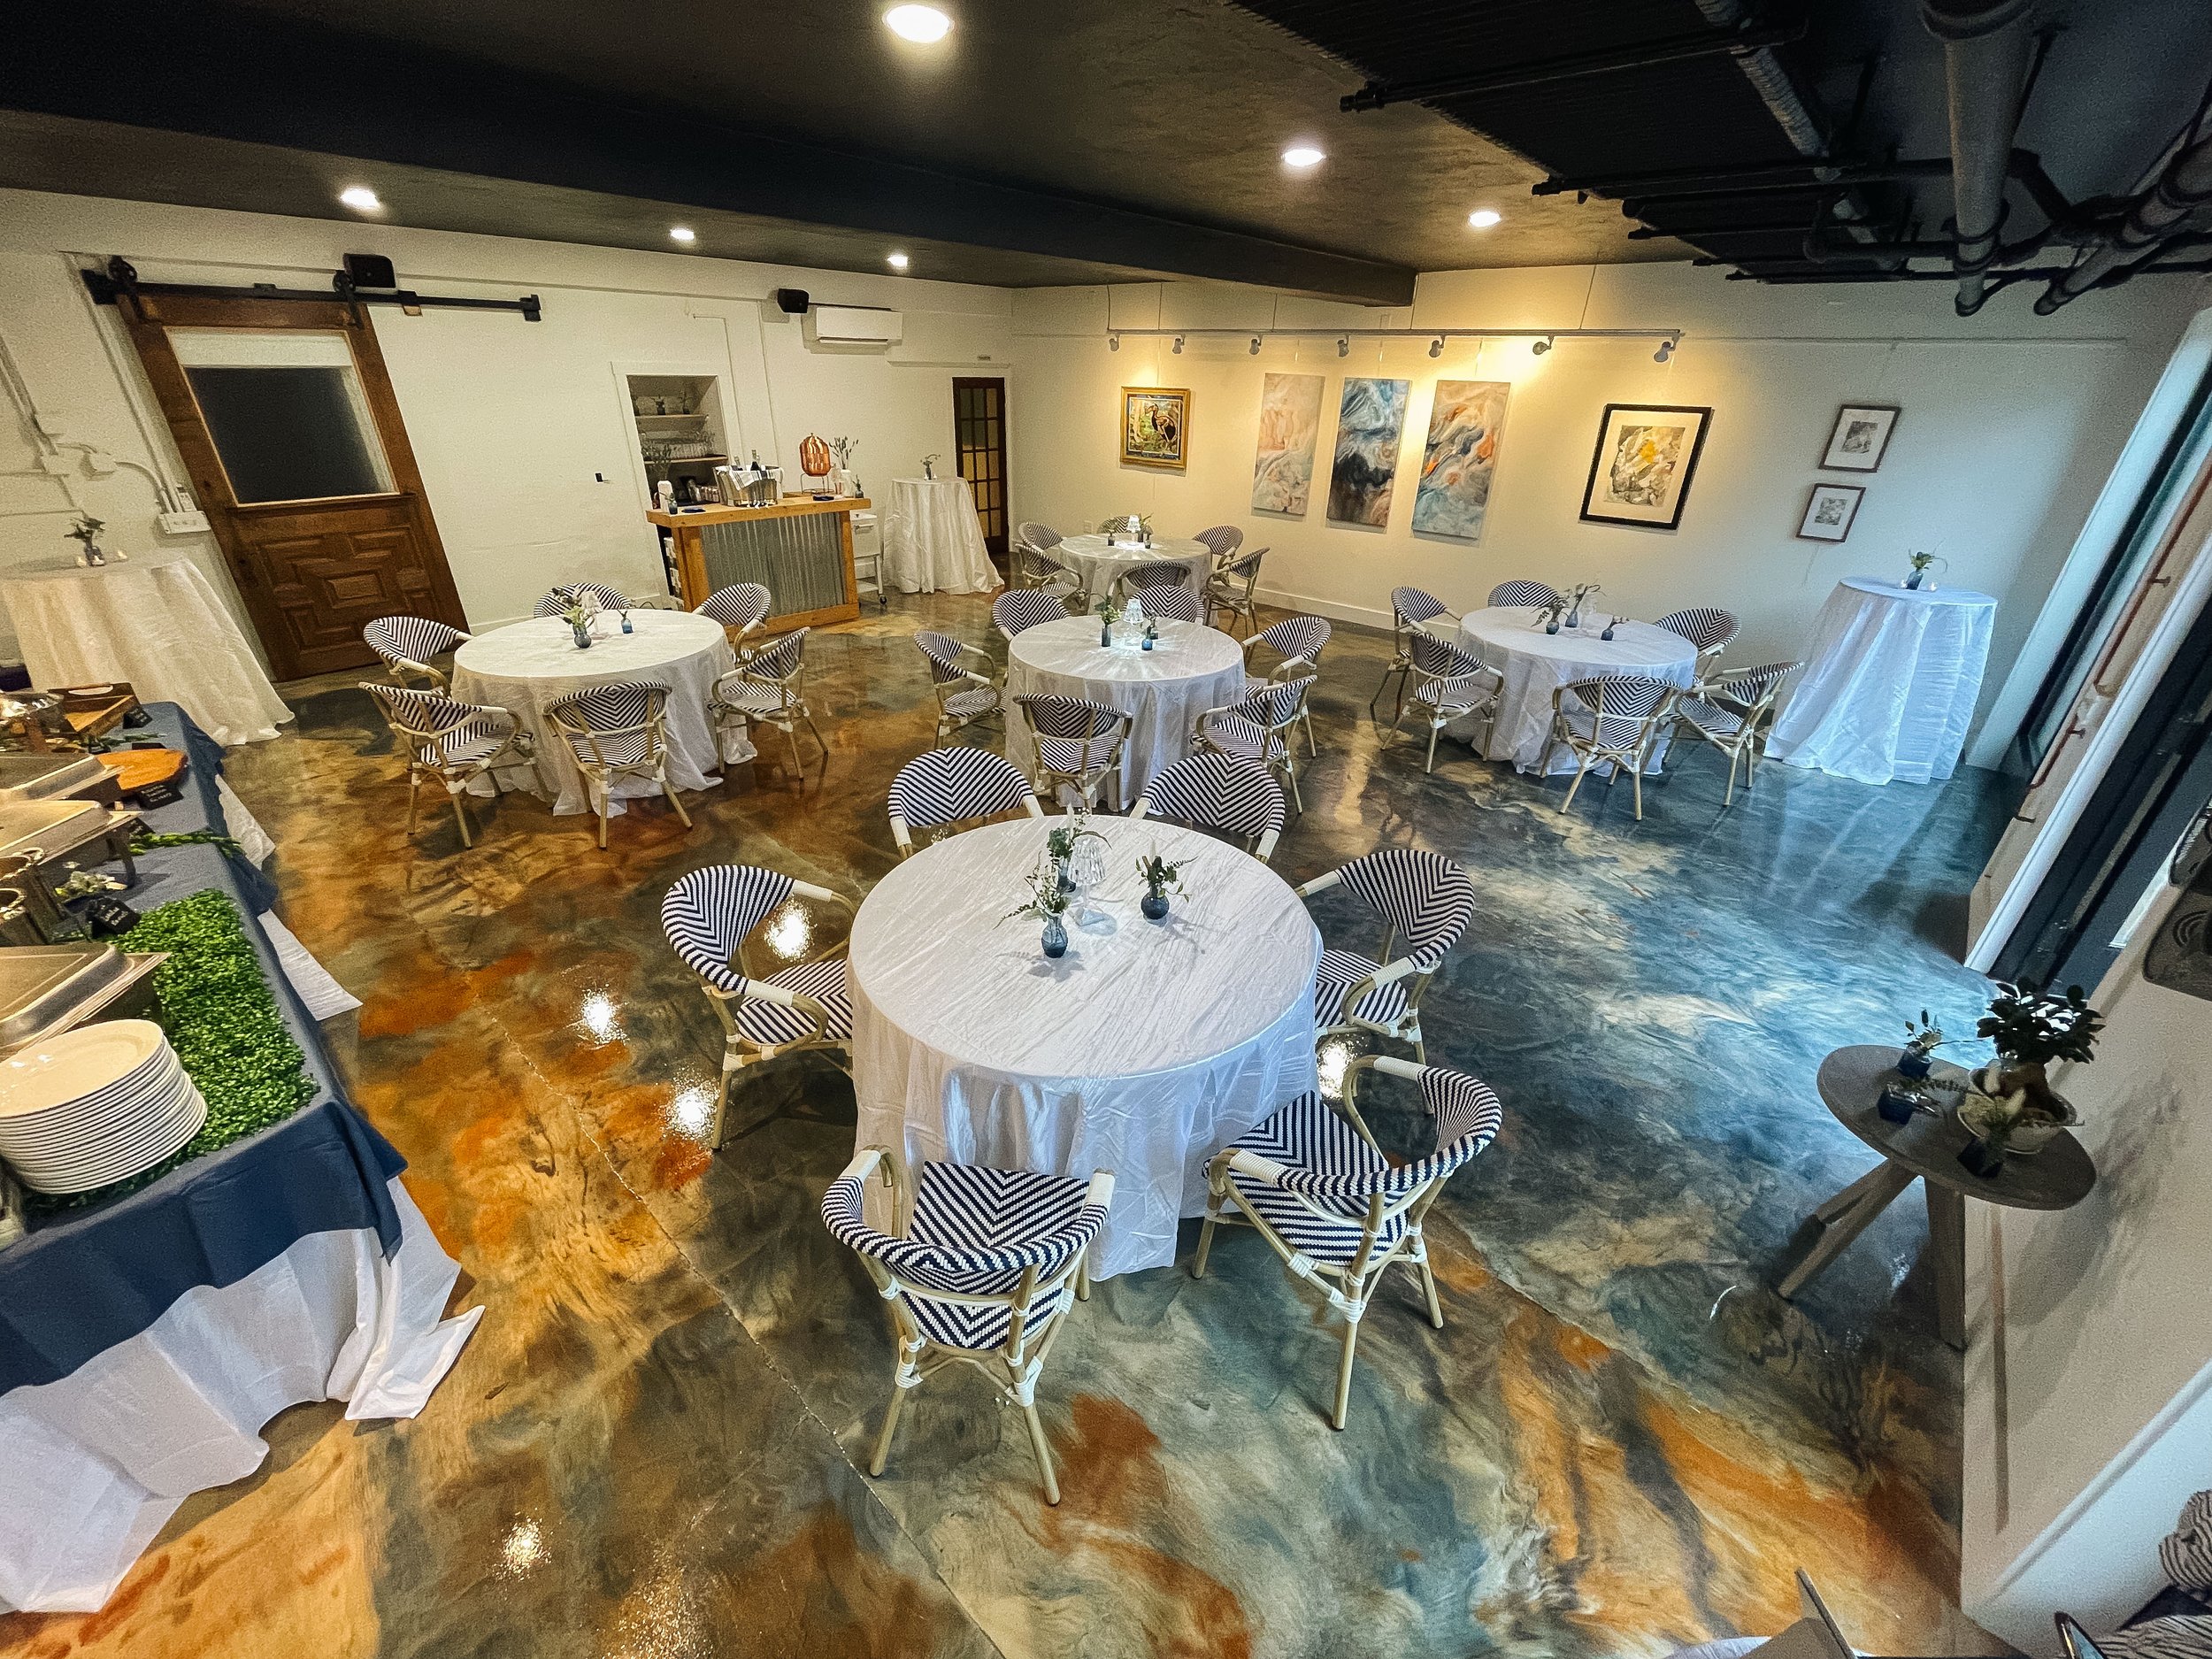 Showcasing the swirling epoxy floors of indoor dining space round tables